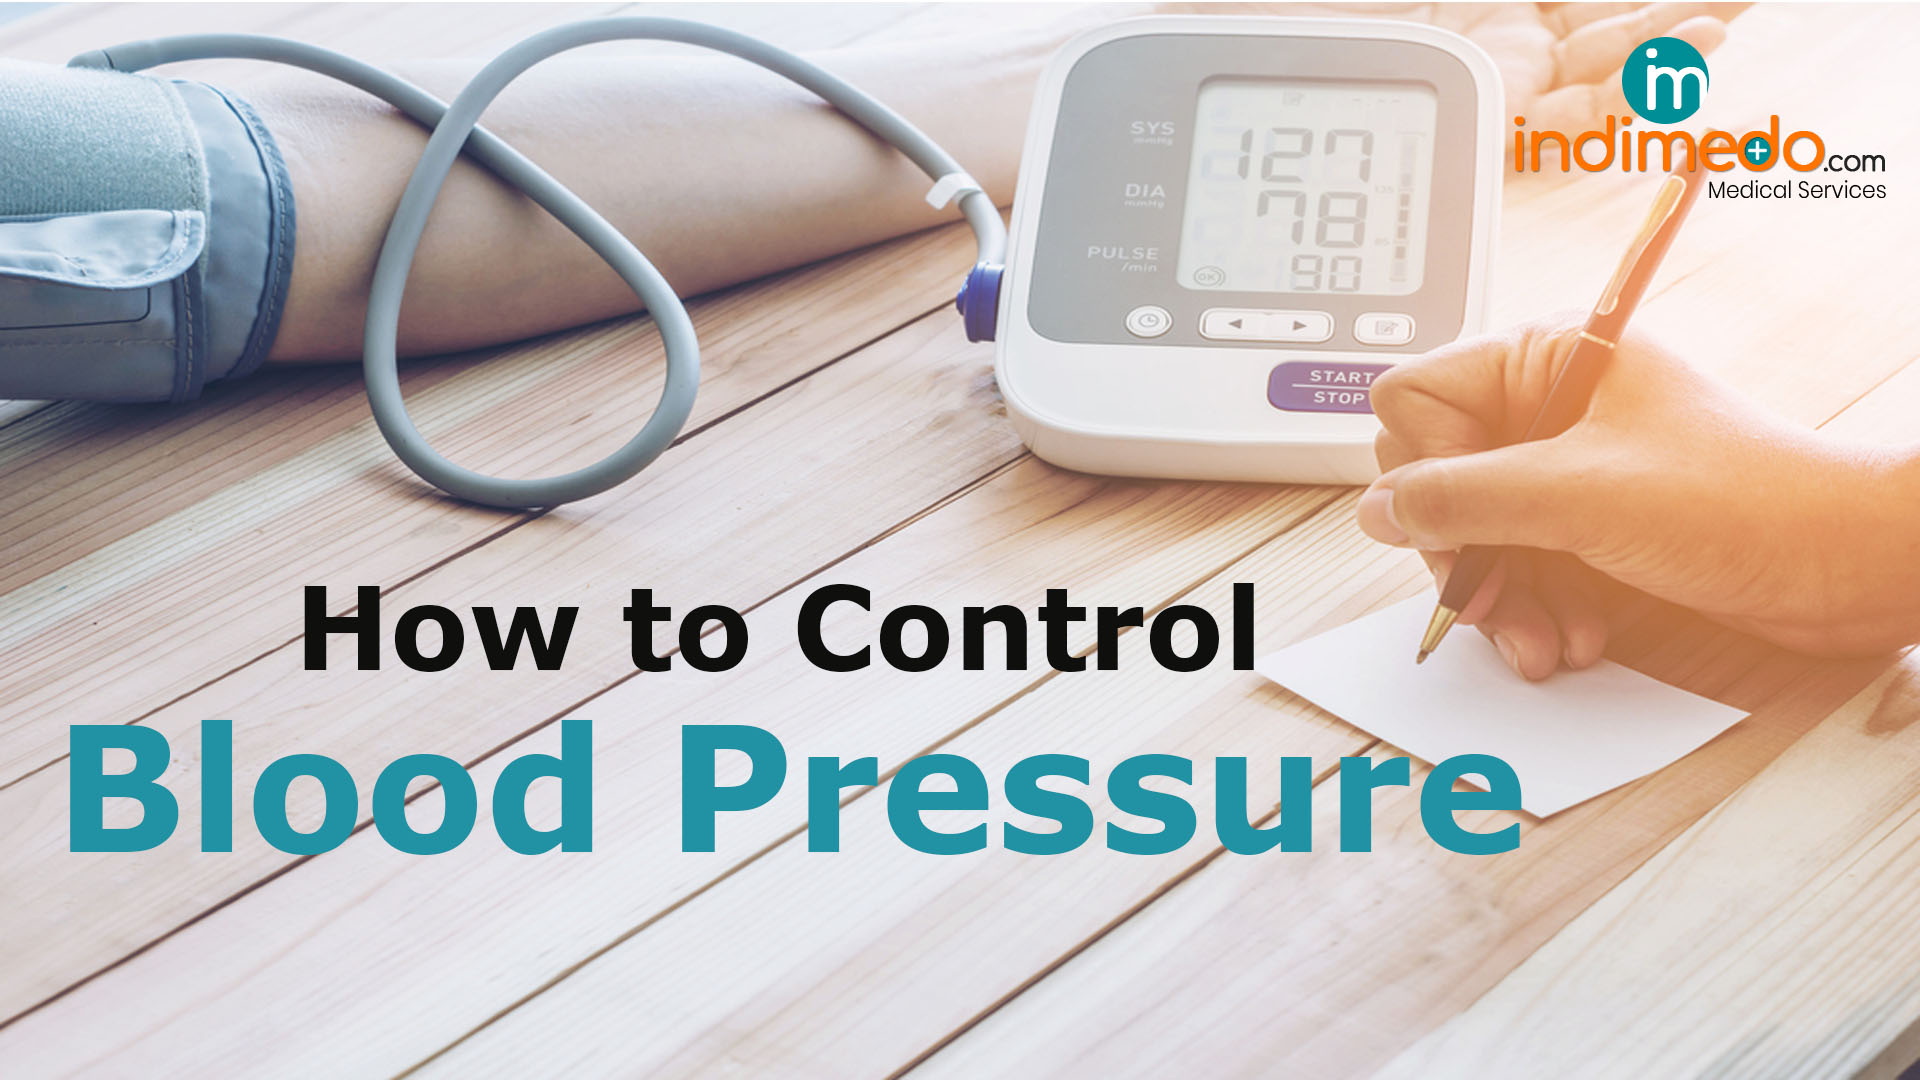 HOW TO CONTROL HIGH BLOOD PRESSURE